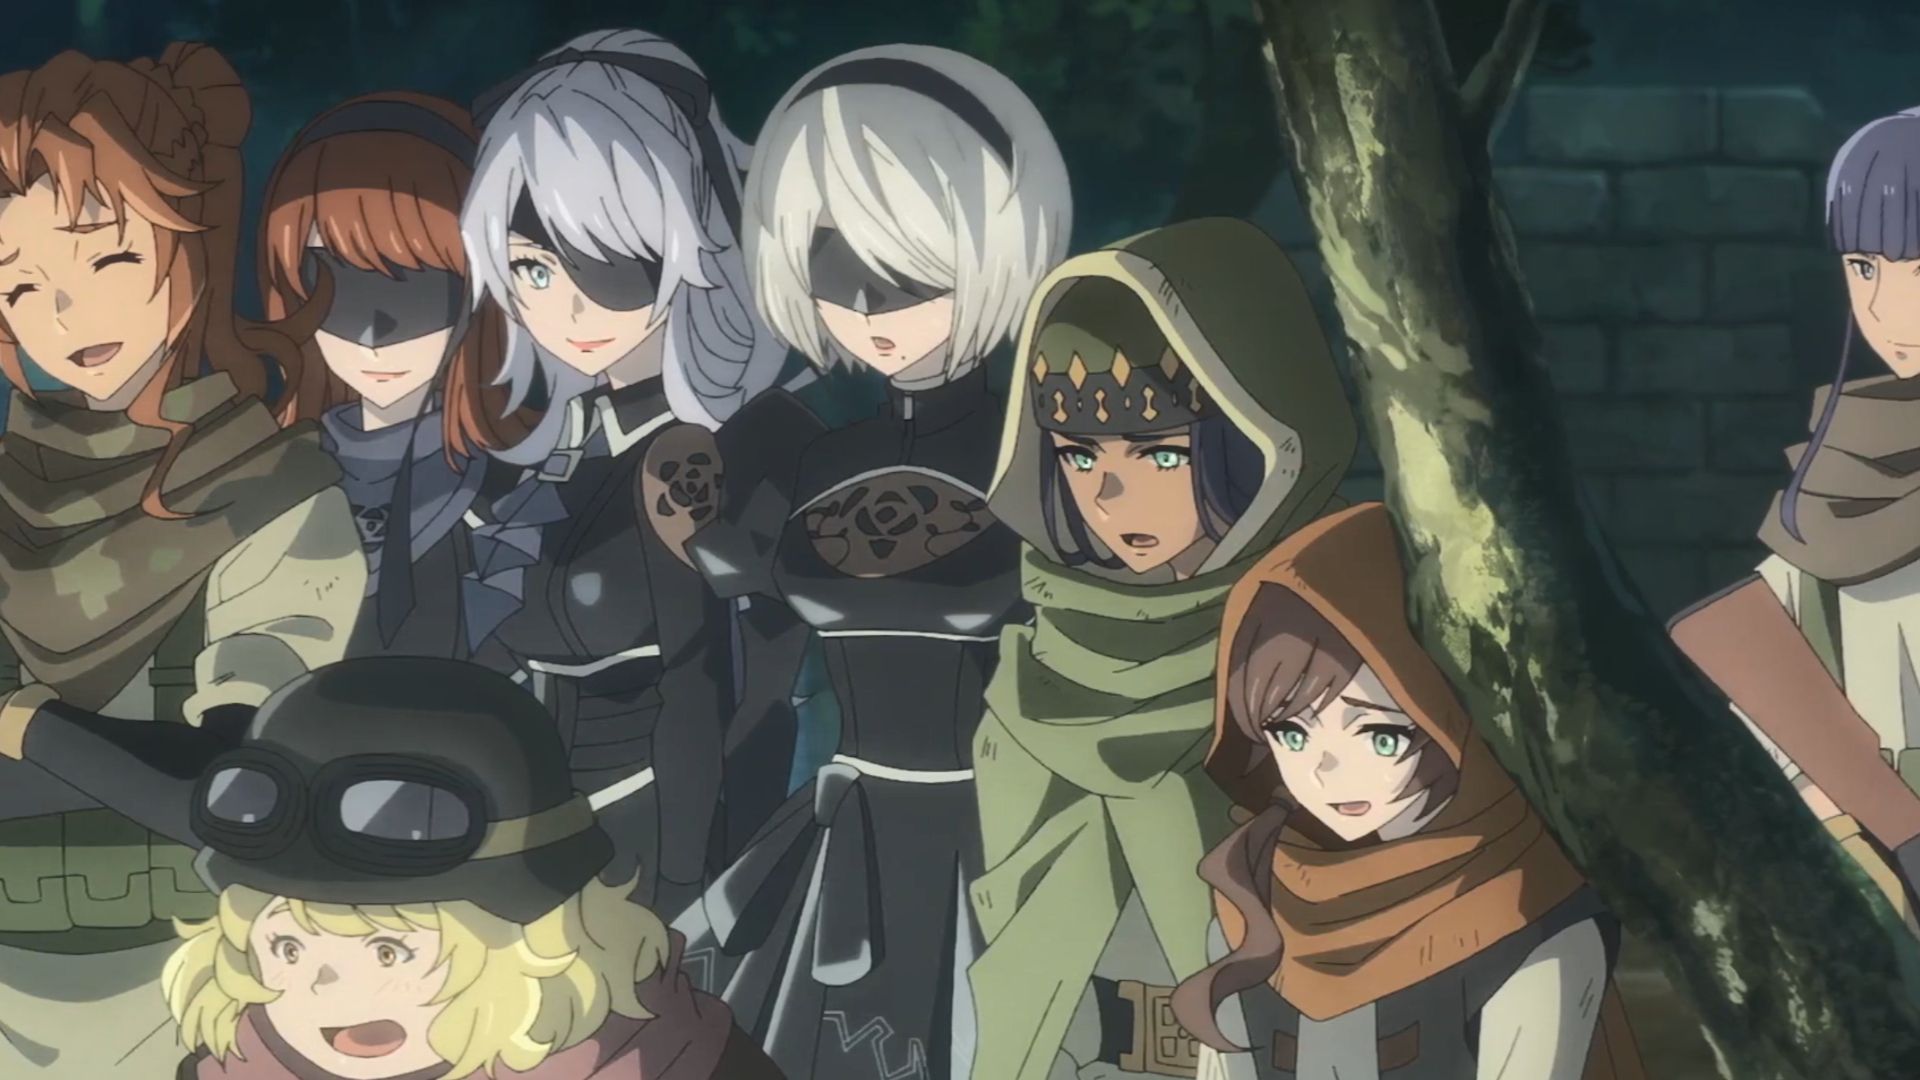 The first YoRHa Androids and Resistance group together, as seen in NieR: Automata Ver1.1a (Image via A-1 Pictures)